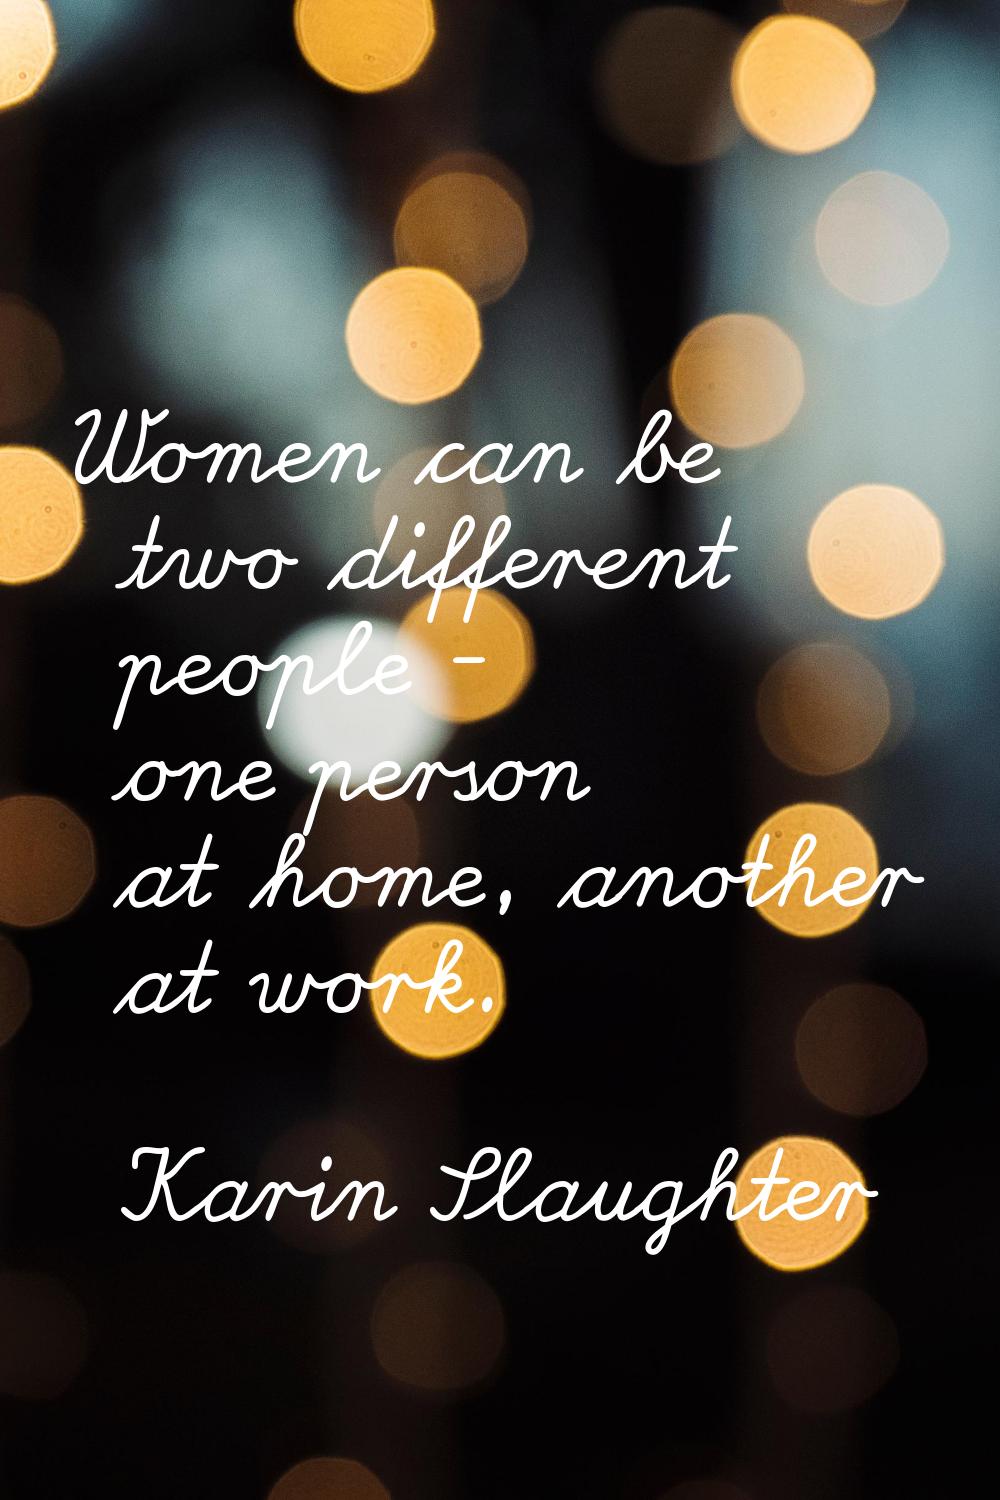 Women can be two different people - one person at home, another at work.